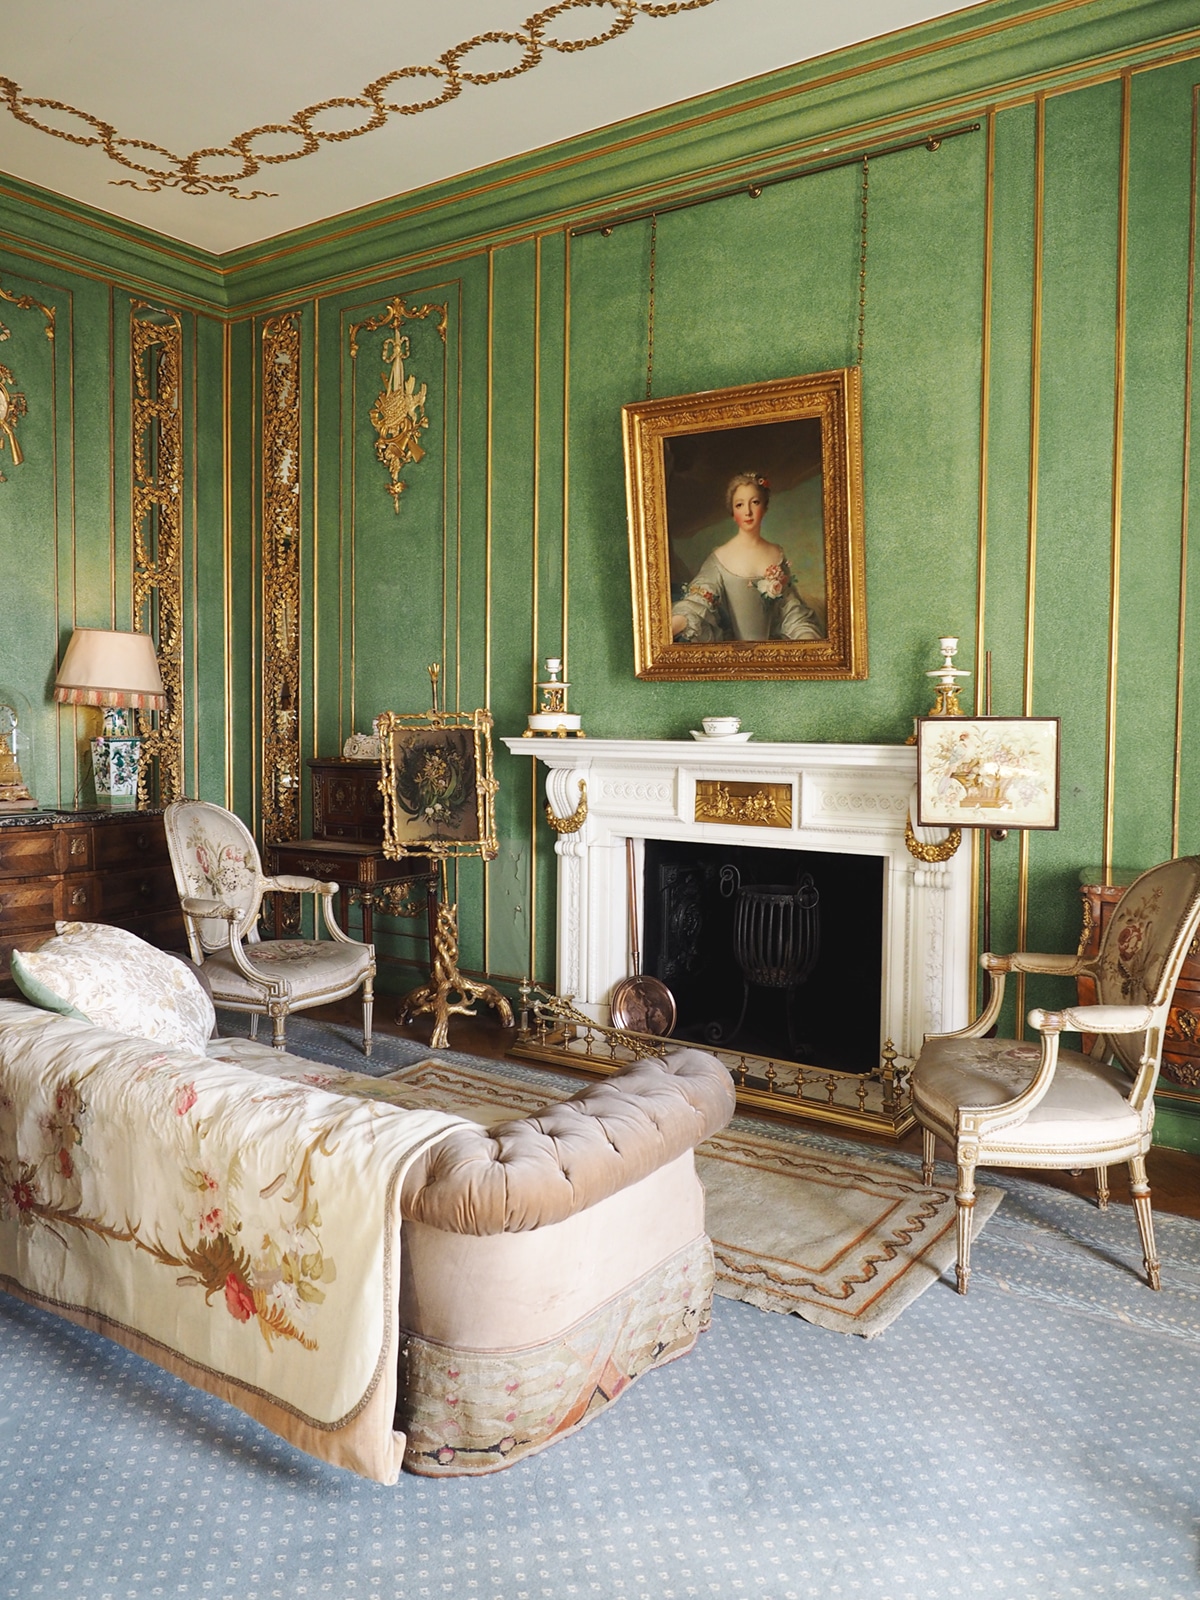 green walls and gilded detail in a castle bedroom | dunrobin castle scotland tour coco kelley